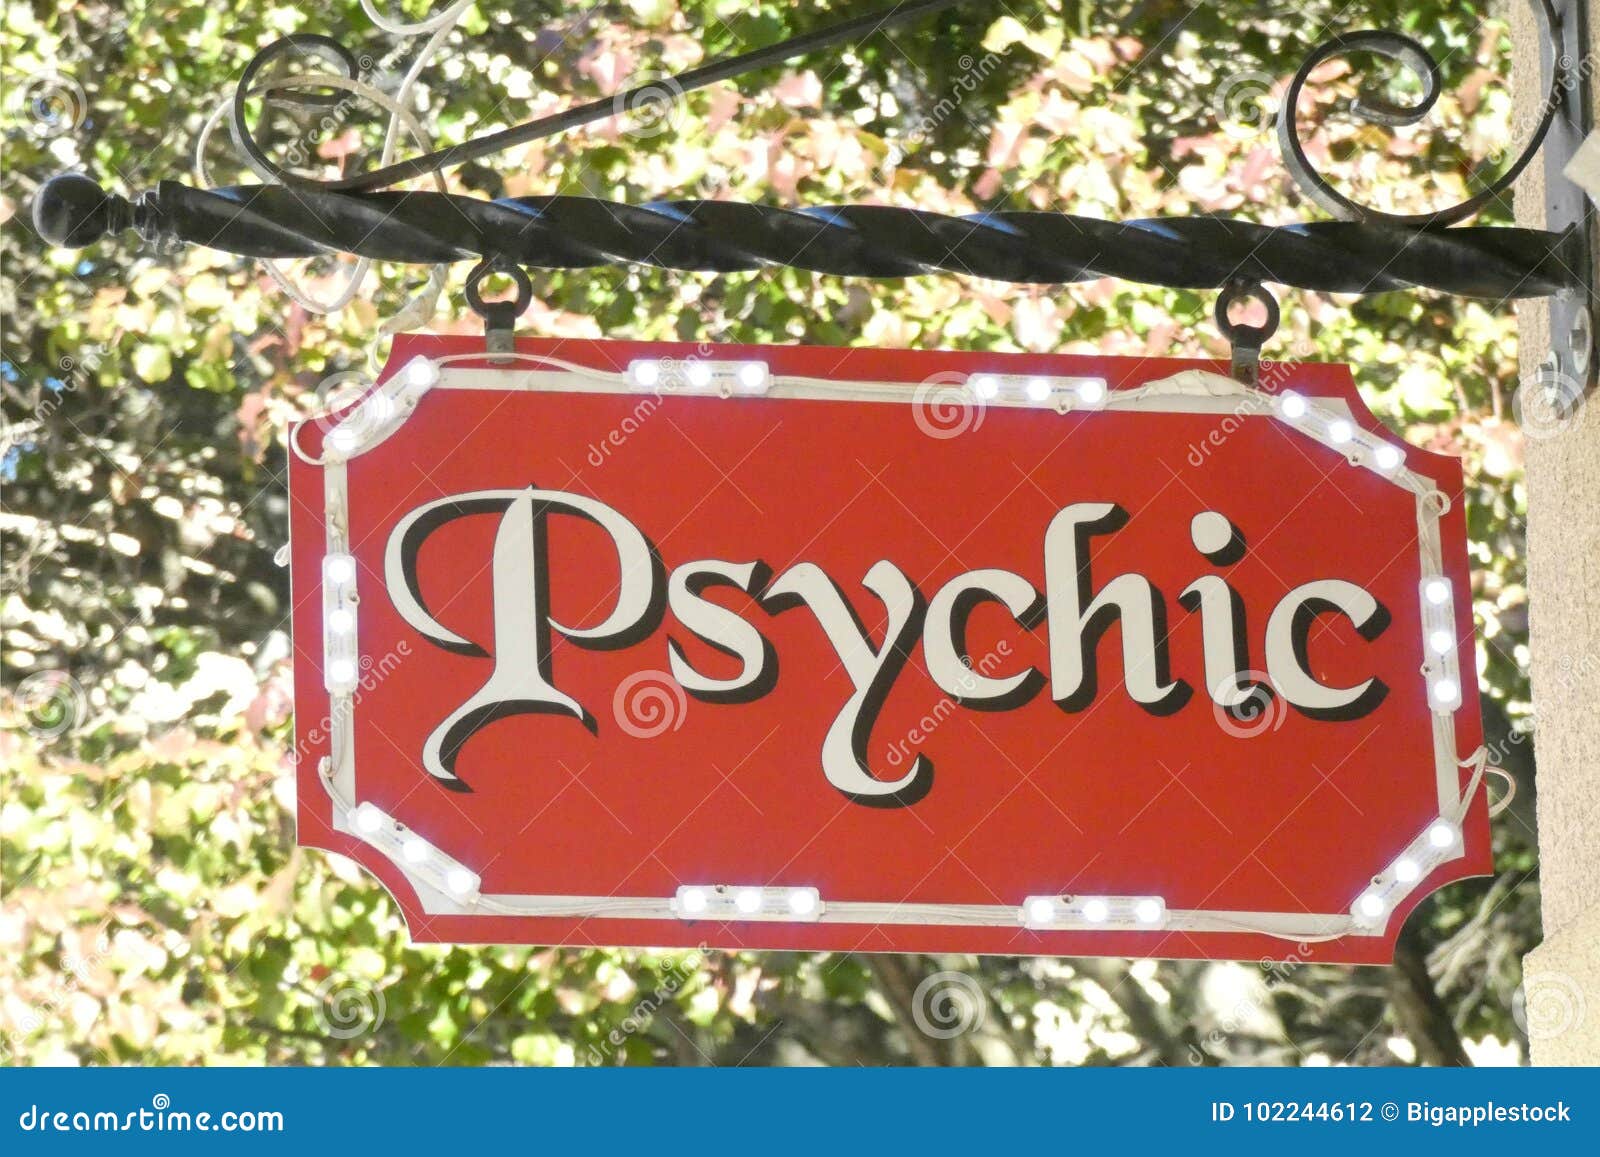 Psychic Stock Images - Download 5,085 Royalty Free Photos